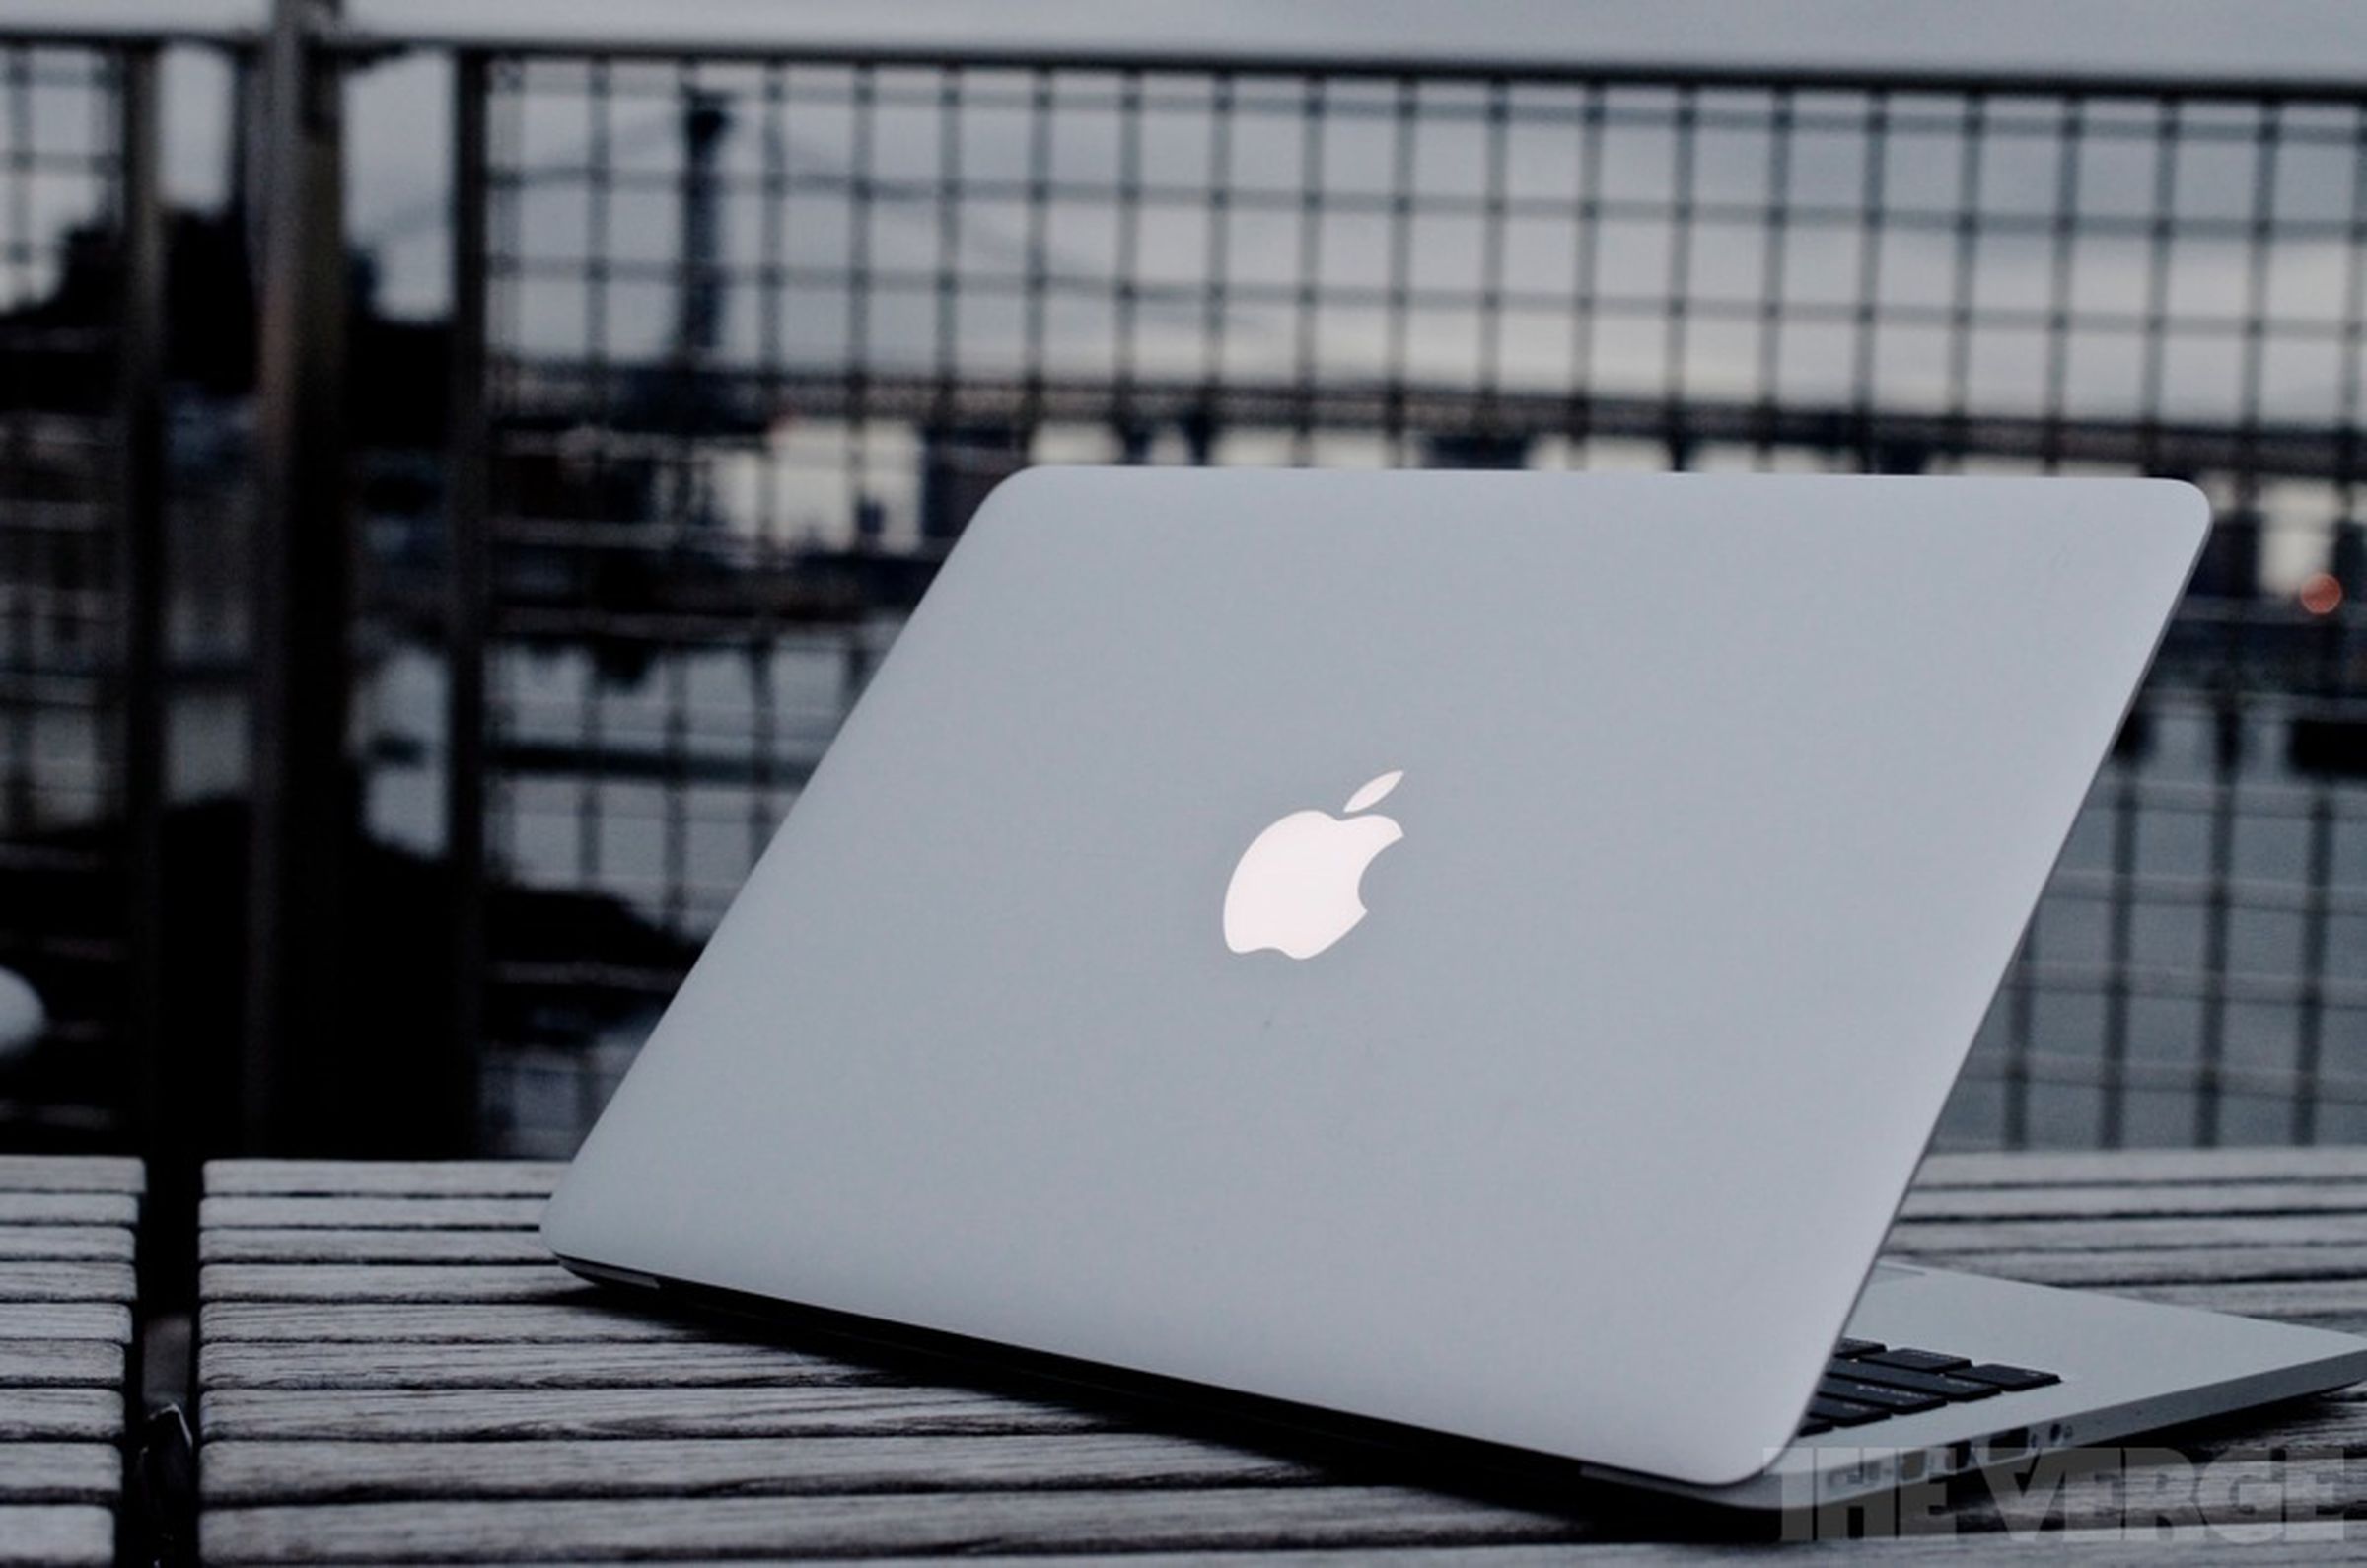 Photos of the 13-inch MacBook Pro with Retina Display